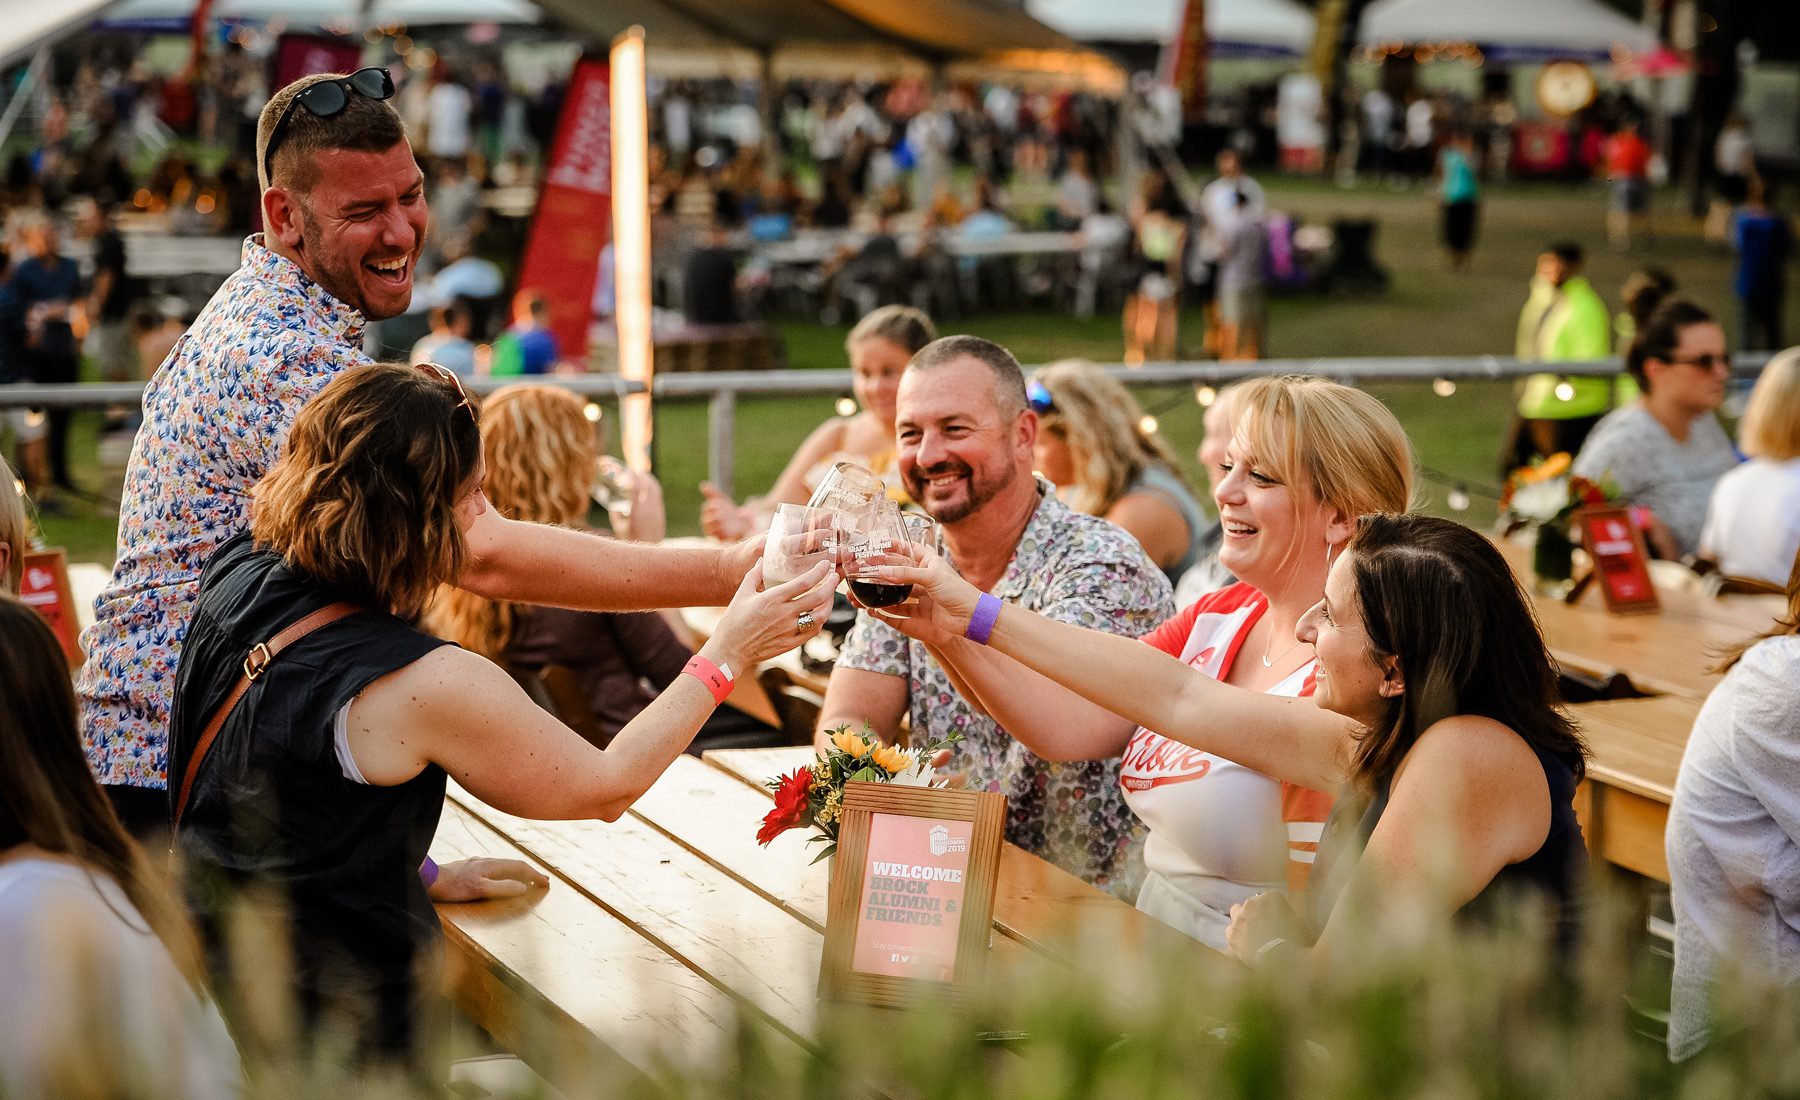 Group of adults laughing and clinking glasses at outdoor festival 